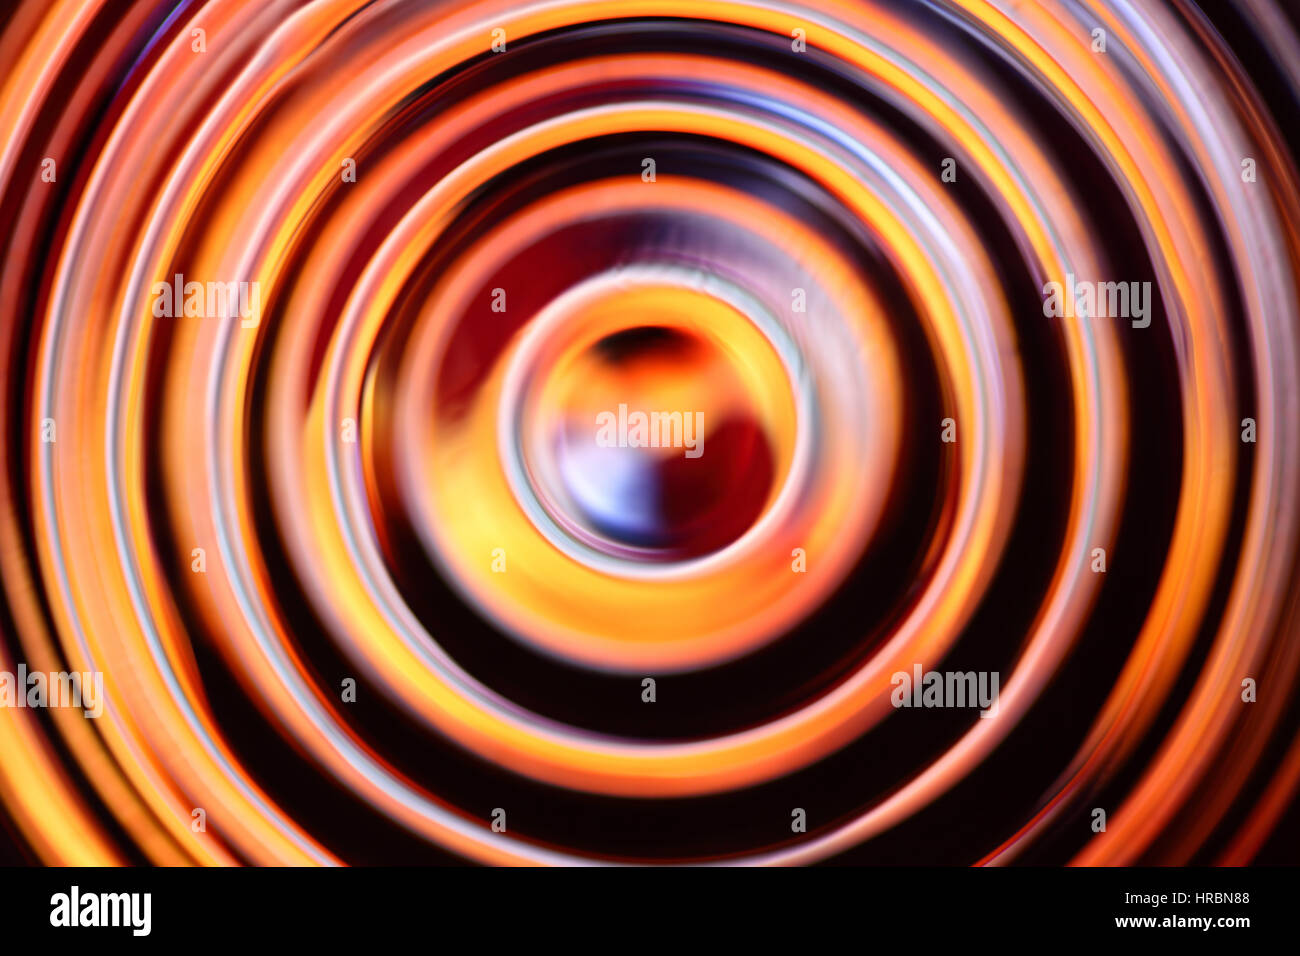 Black - orange abstract background with defocused concentric circles Stock Photo